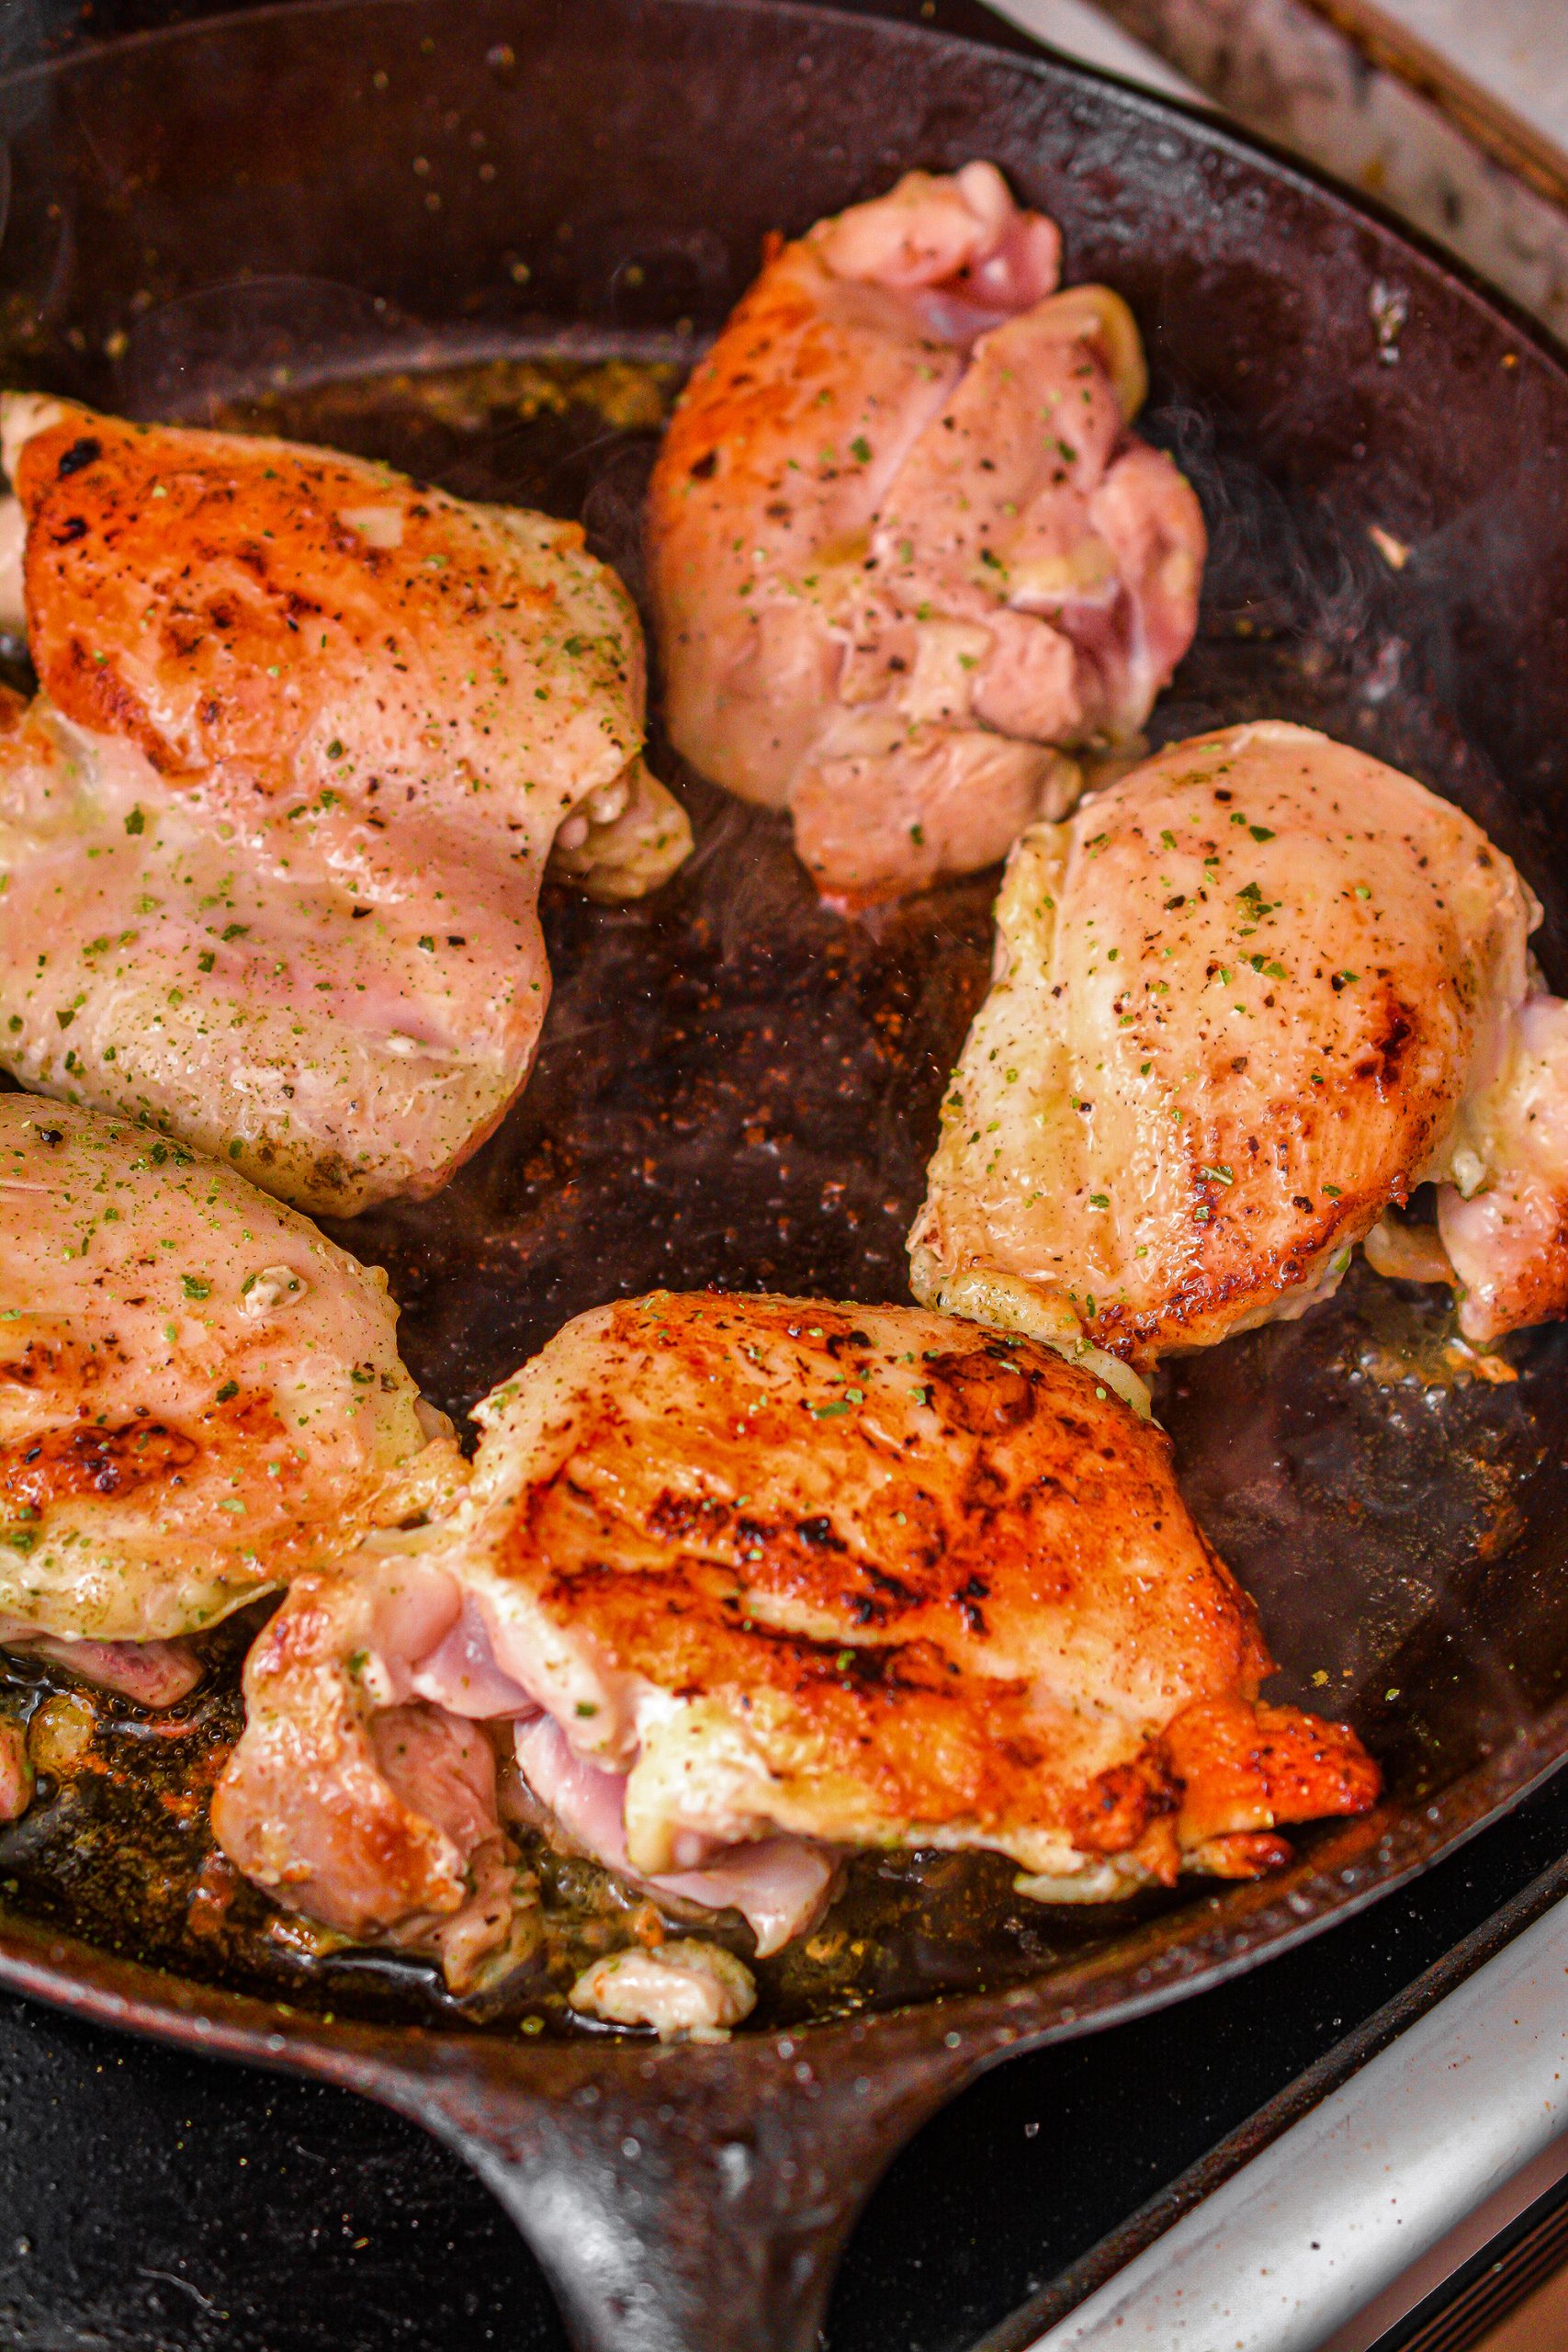 Season the chicken with salt and pepper to taste, the thyme and sage. Sear the chicken on both sides, browning it well and evenly. Remove the chicken and set aside.